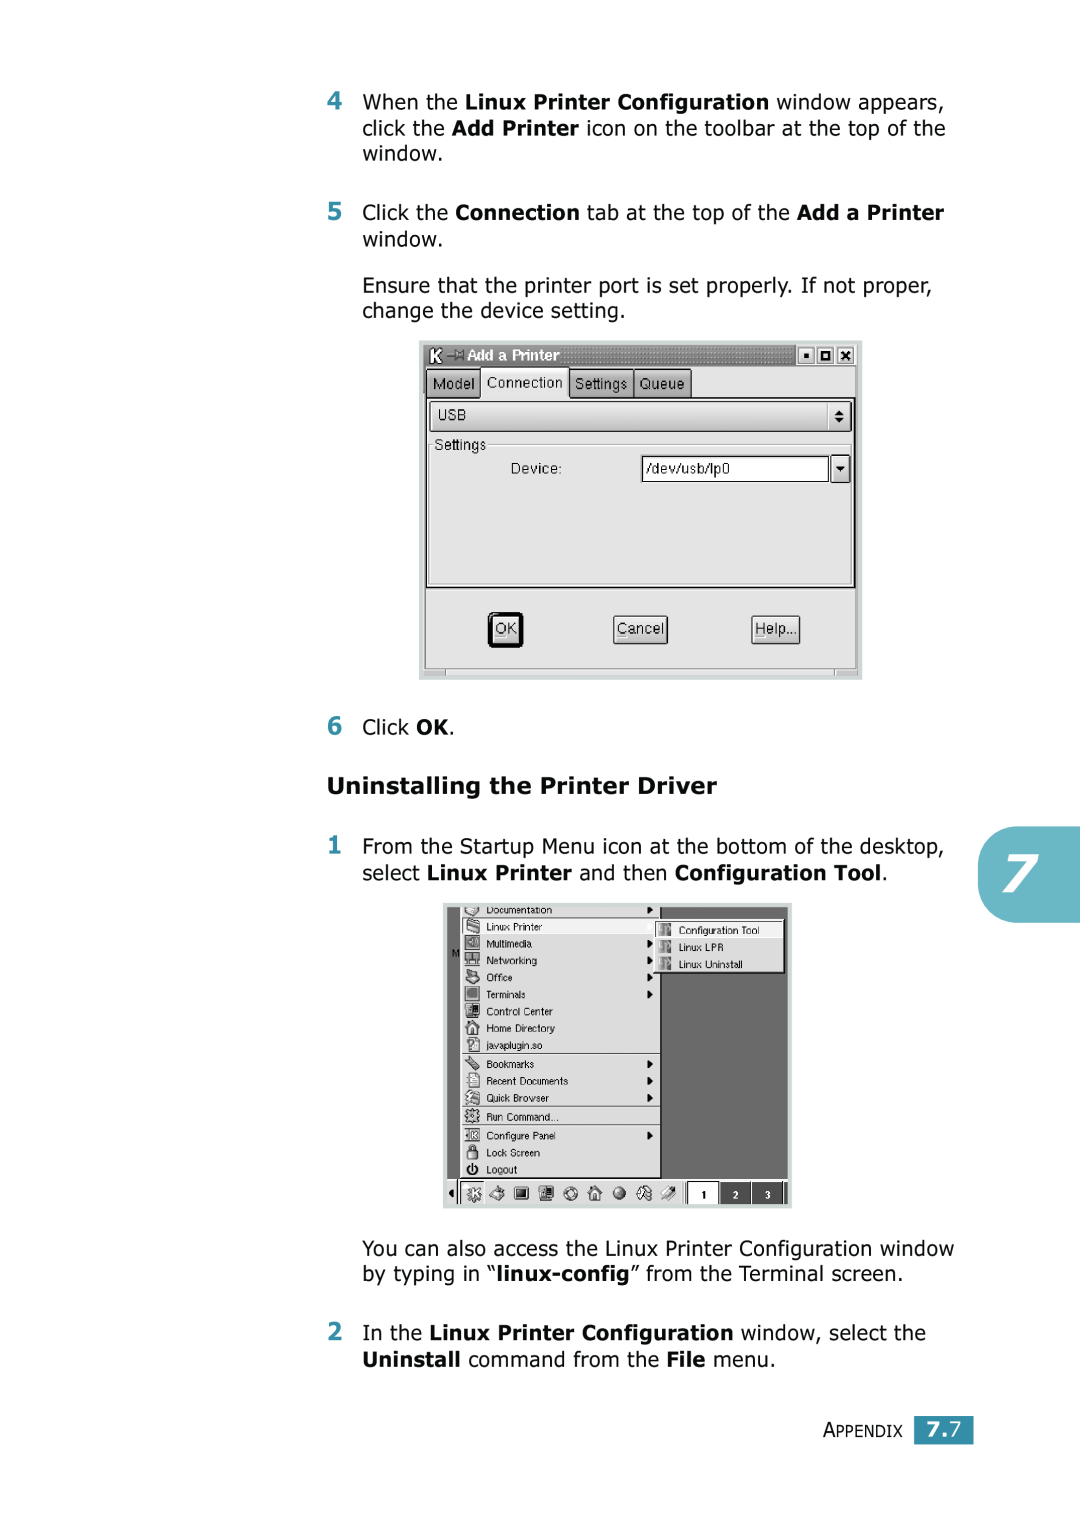 Samsung ML-1520 manual Uninstalling the Printer Driver, select Linux Printer and then Configuration Tool 